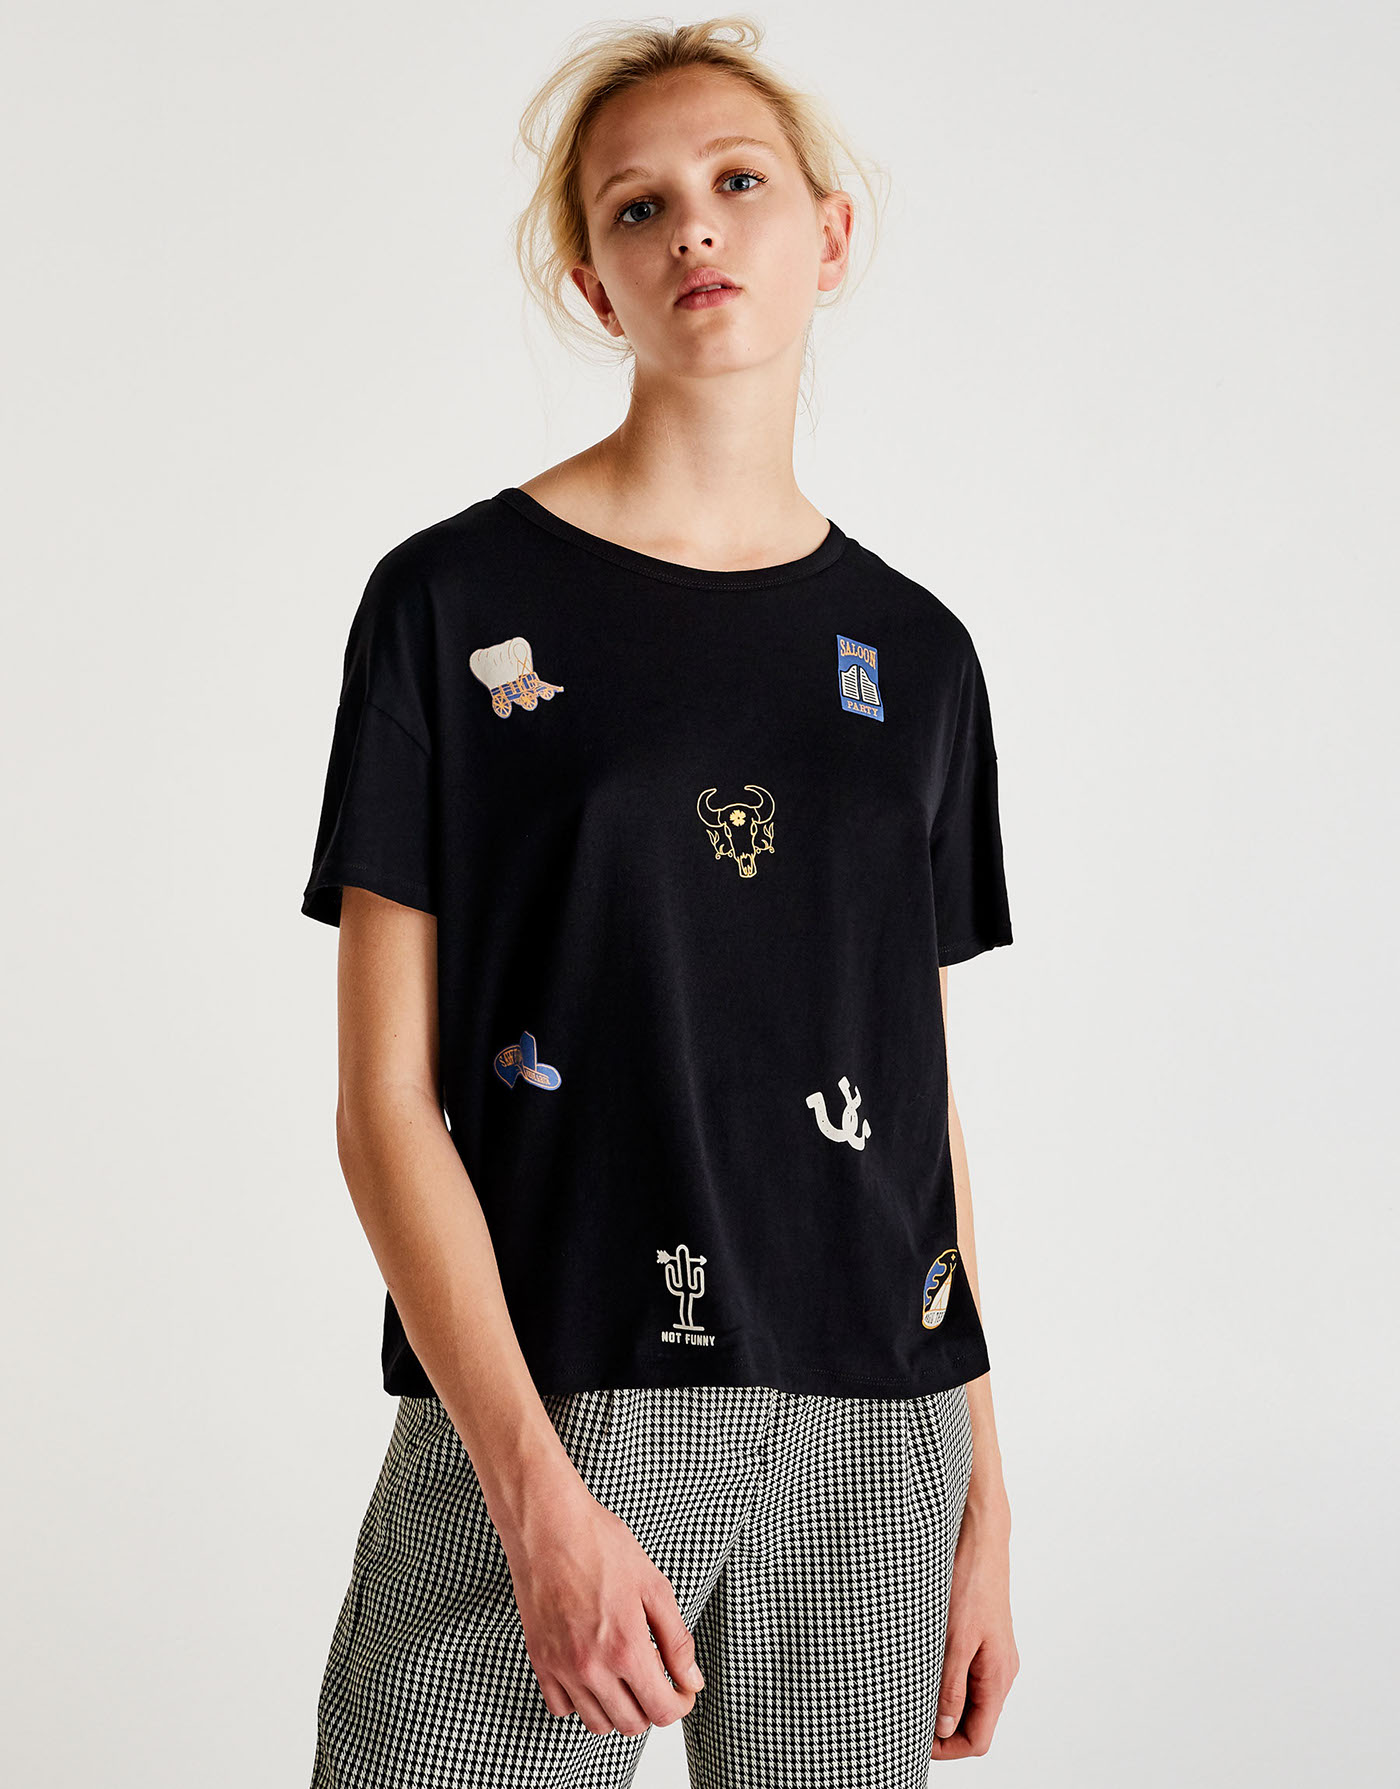 PULL&BEAR- PATCHES PRINT on Behance